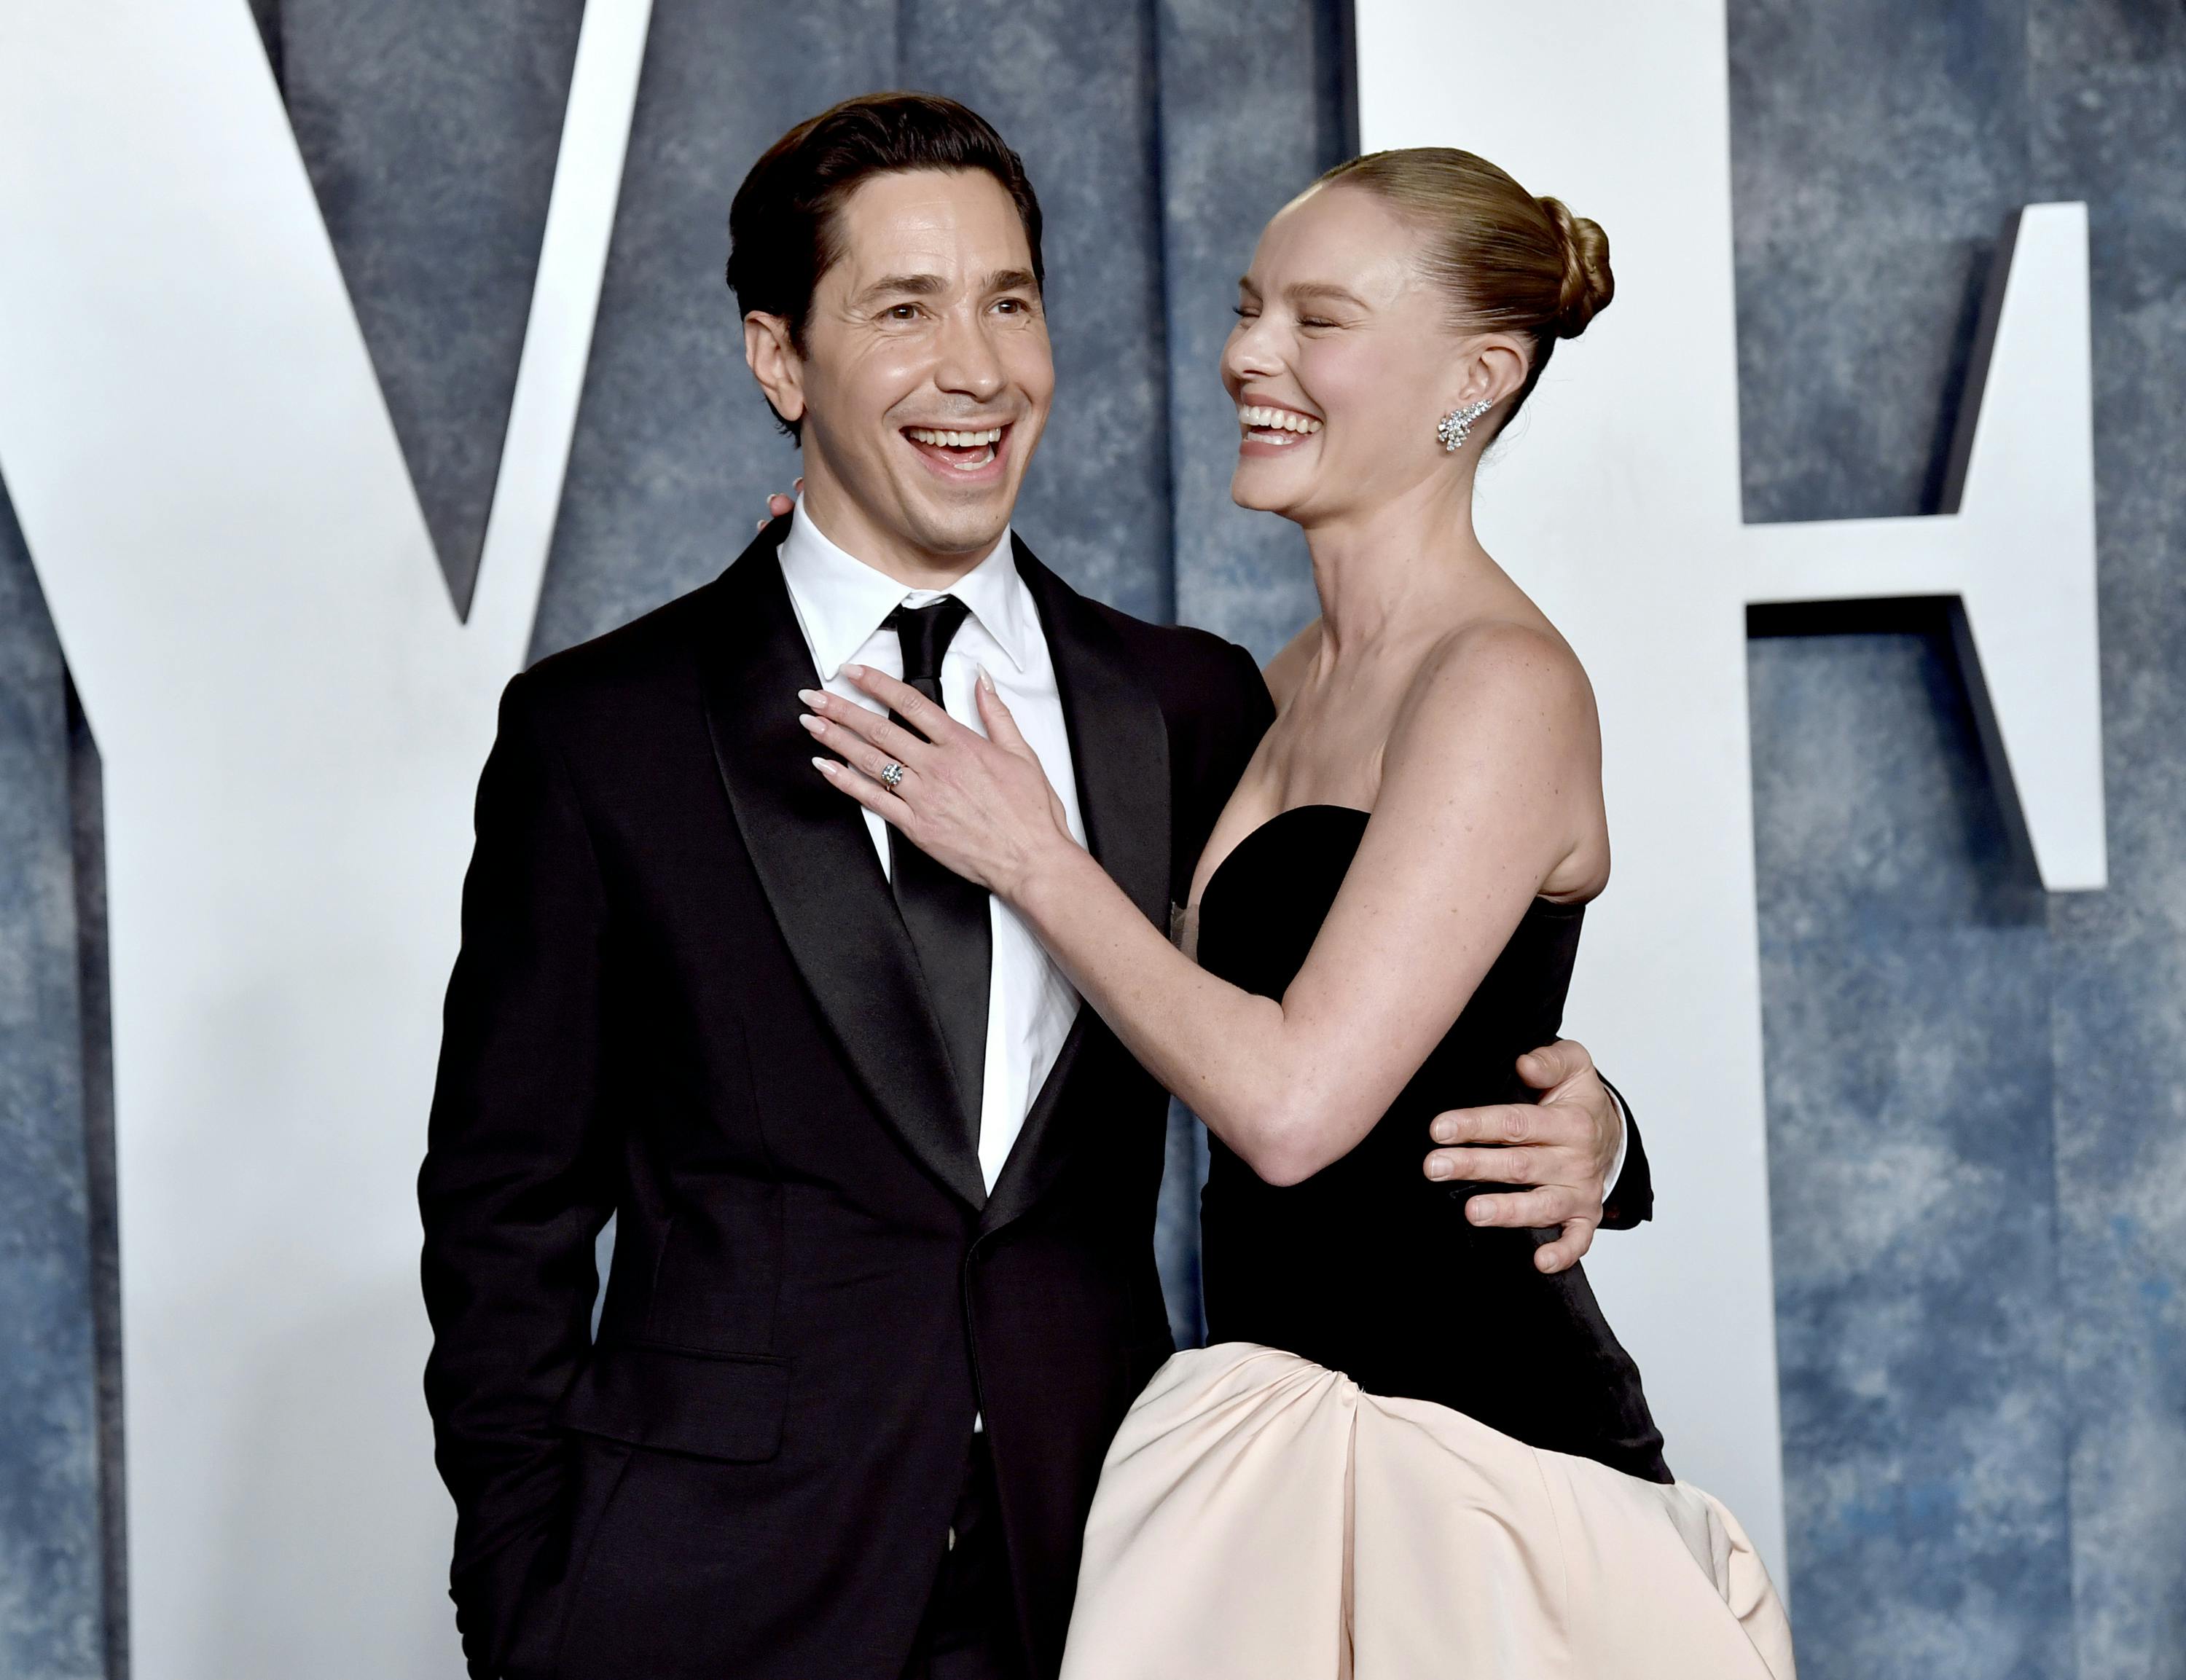 Justin Long, left, and Kate Bosworth arrive at the Vanity Fair Oscar Party on Sunday, March 12, 2023, at the Wallis Annenberg Center for the Performing Arts in Beverly Hills, Calif. (Photo by Evan Agostini/Invision/AP)